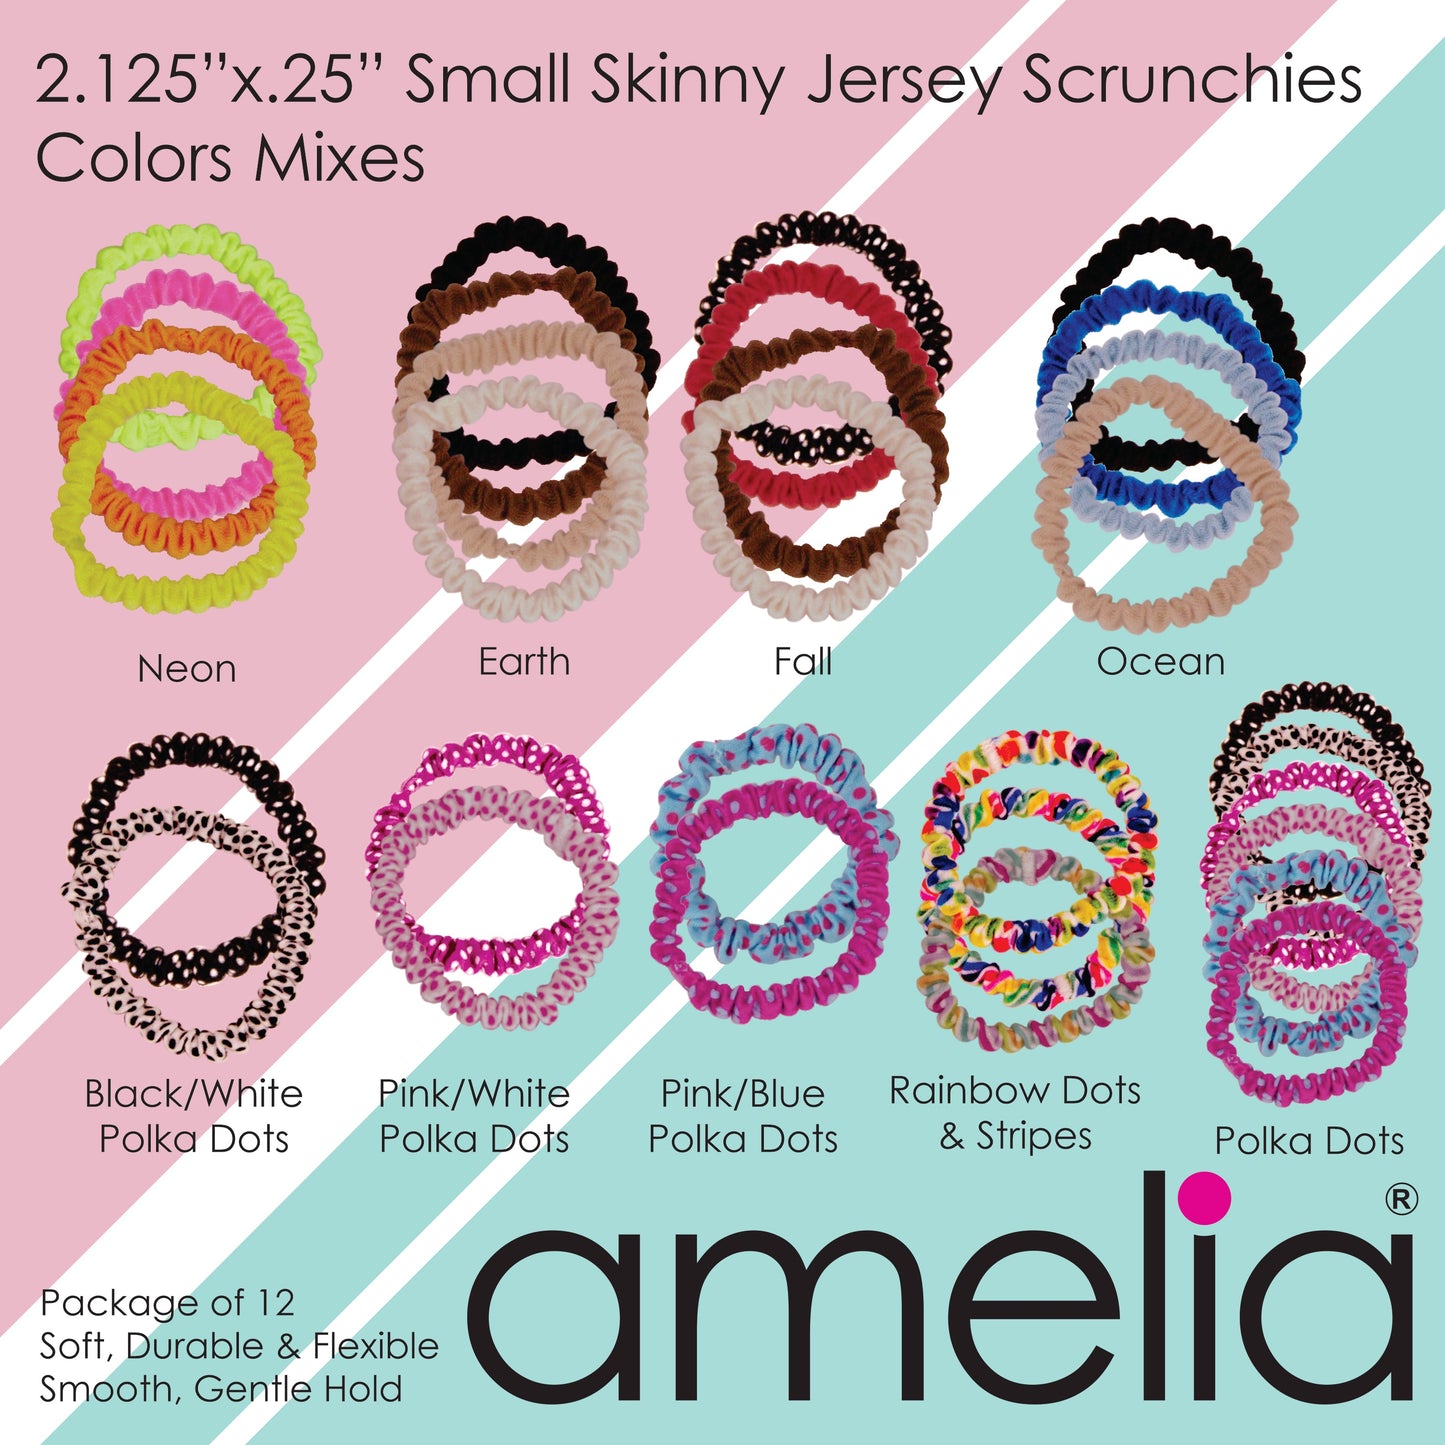 Amelia Beauty, Pink with White Dots Skinny Jersey Scrunchies, 2.125in Diameter, Gentle on Hair, Strong Hold, No Snag, No Dents or Creases. 12 Pack